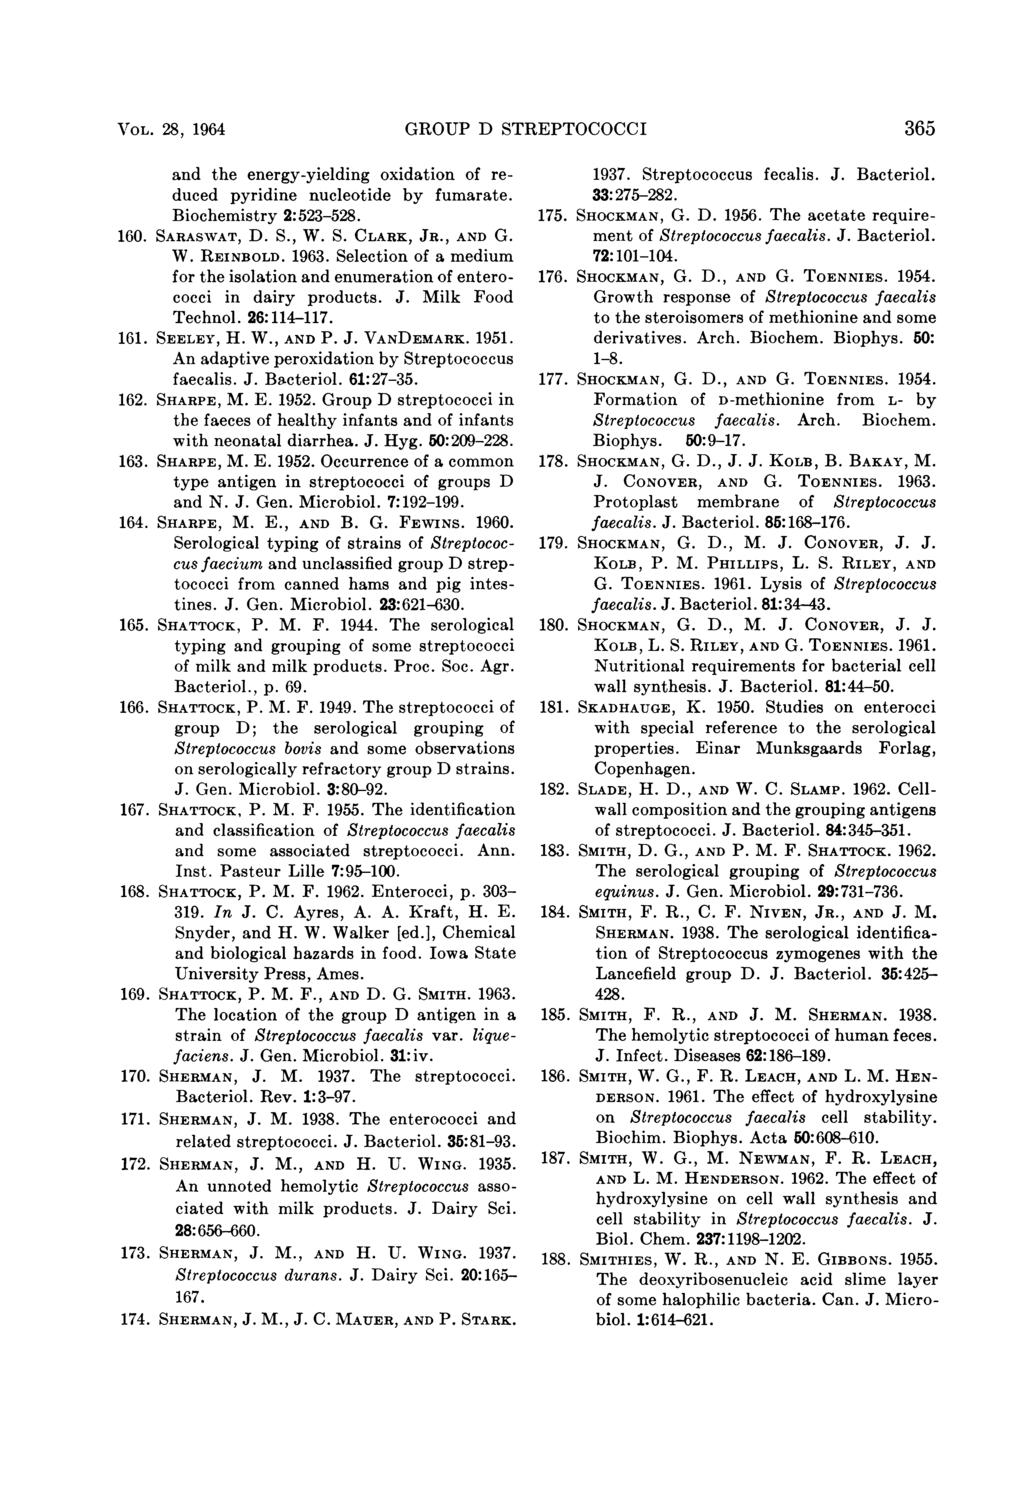 VOL. 28,7 1964 GROUP D STREPTOCOCCI 365 and the energy-yielding oxidation of reduced pyridine nucleotide by fumarate. Biochemistry 2:523-528. 160. SARASWVAT, D. S., W. S. CLARK, JR., AND G. W. REINBOLD.